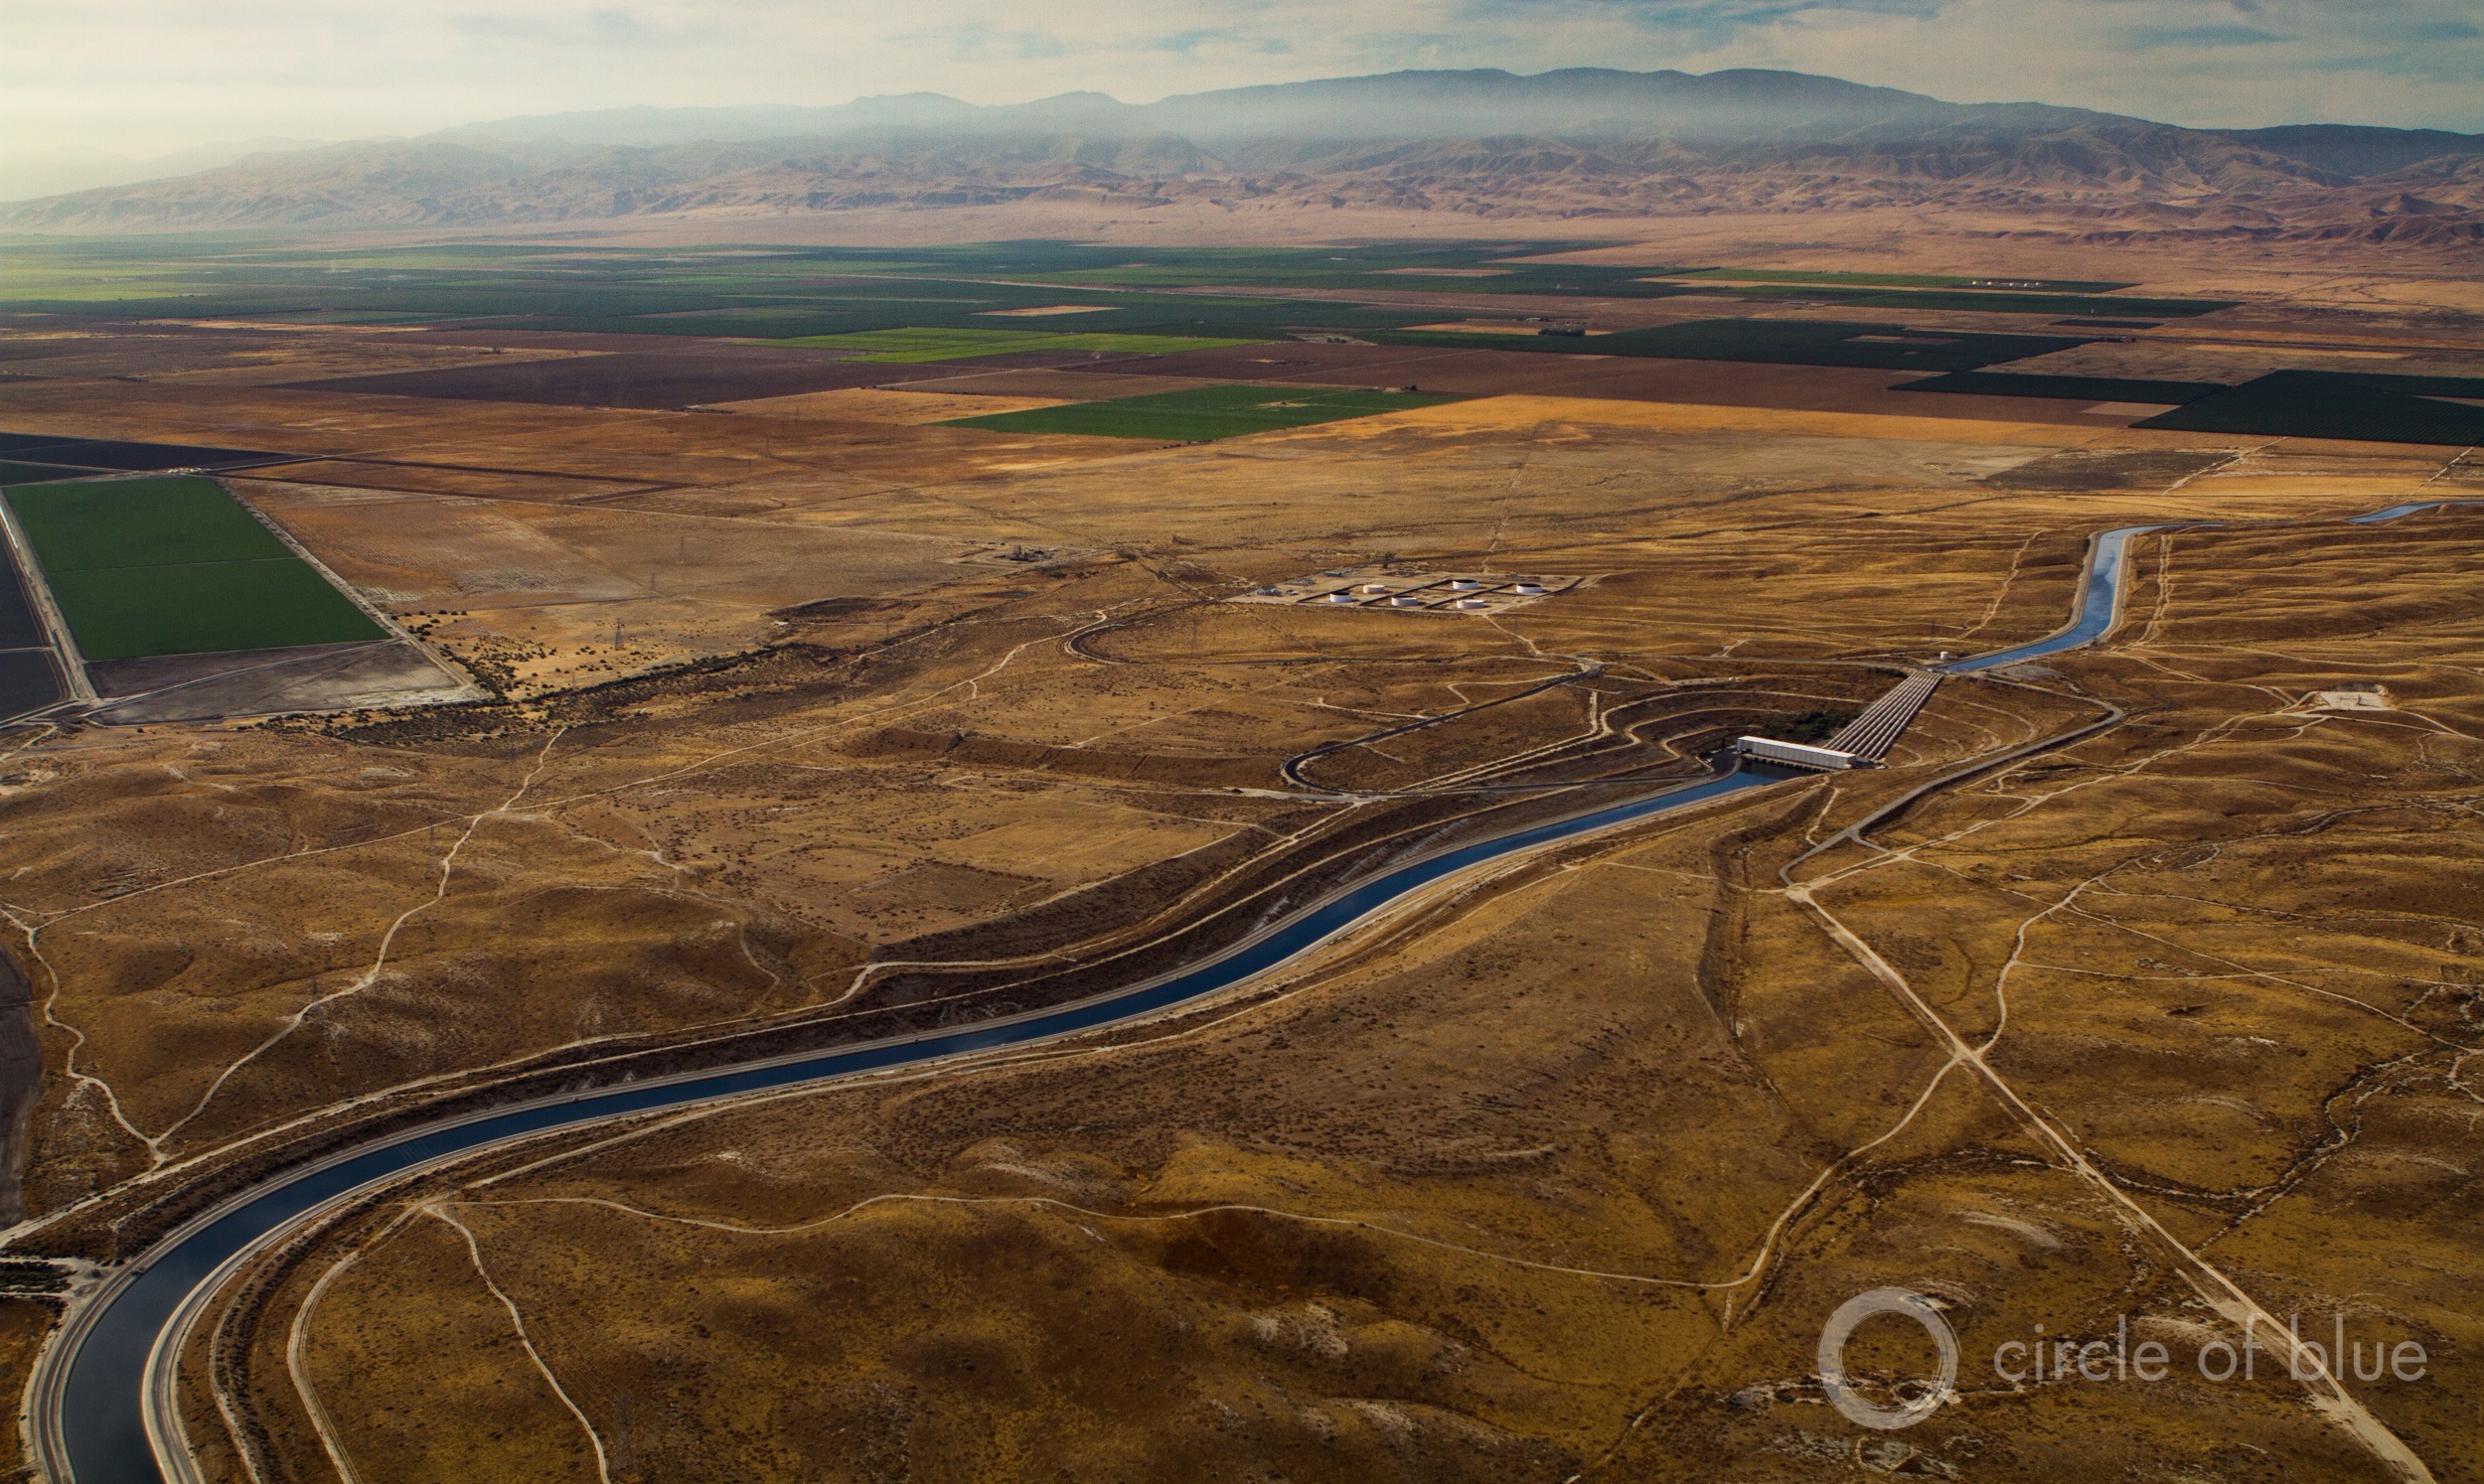 California's Central Valley is the heart of the state's farming and oil industries. Stanford researchers found significantly more fresh groundwater beneath the valley the deeper they looked. Photo © J. Carl Ganter / Circle of Blue